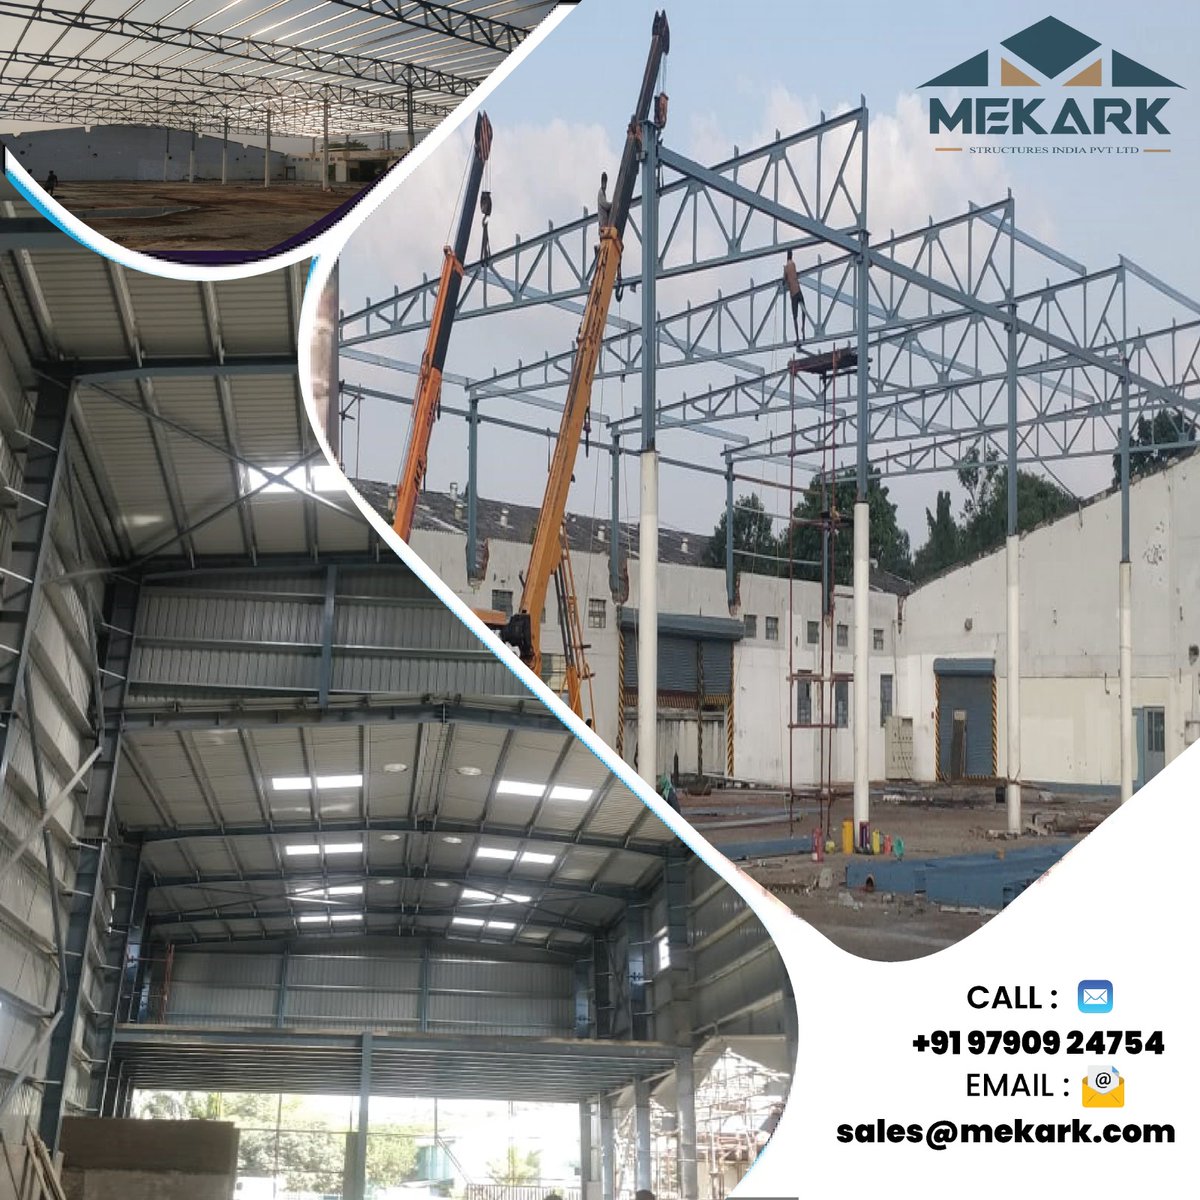 Mekark Structure Pvt Ltd is a leading pre-engineered building manufacturer and provider of prefabrication building services. 
#PreEngineeredBuilding #PrefabricatedBuilding #SteelStructure #CustomizedDesign #EasyAssembly #QuickInstallation #CostEffectiveSolution #FactoryBuilding